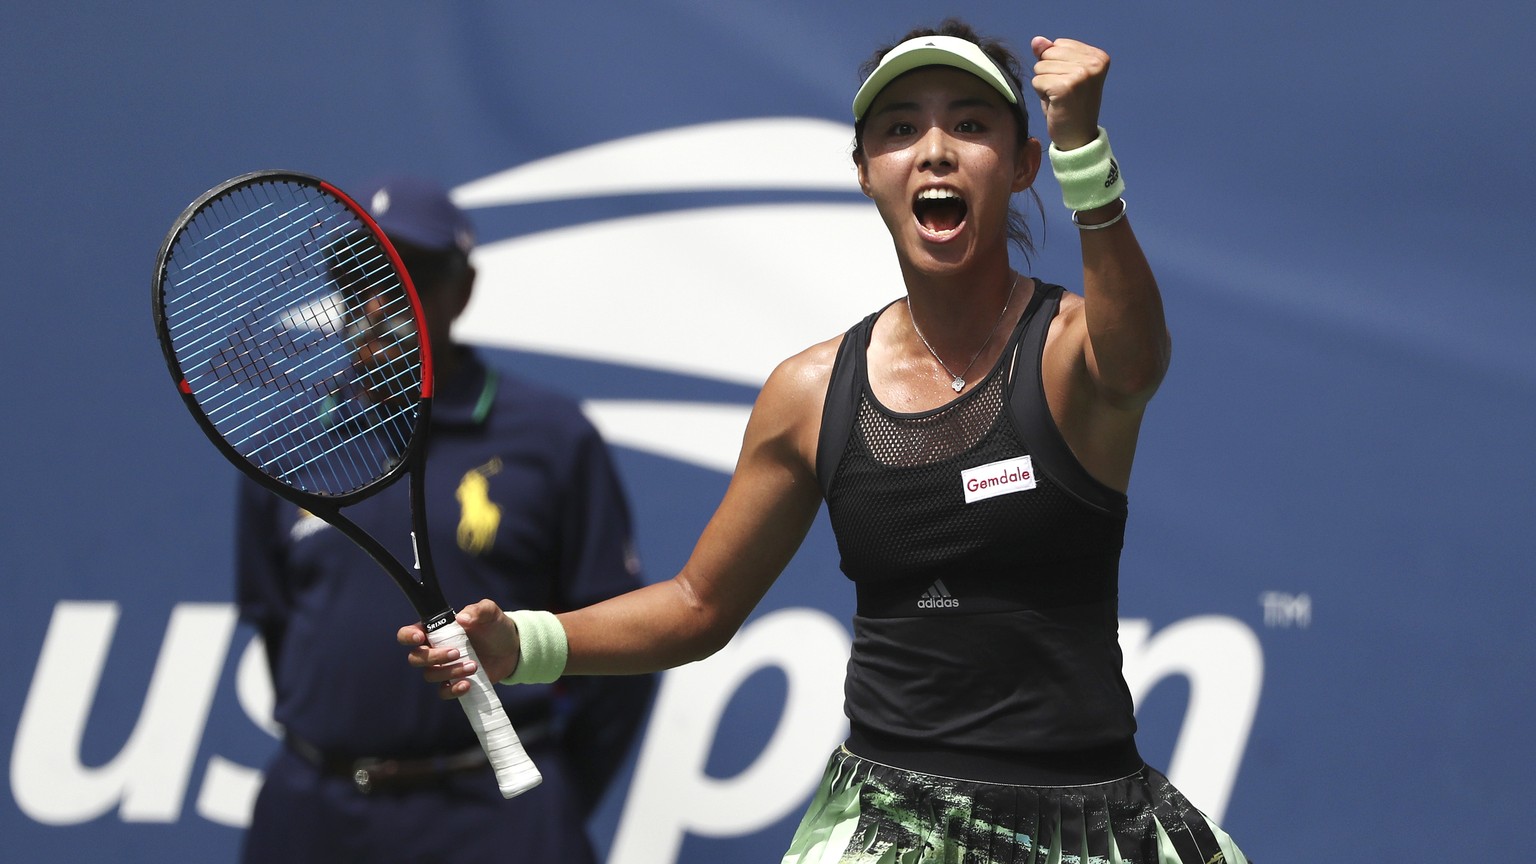 Qiang Wang, of China, reacts after defeating Ashleigh Barty, of Australia, during round four of the US Open tennis championships Sunday, Sept. 1, 2019, in New York. (AP Photo/Kevin Hagen)